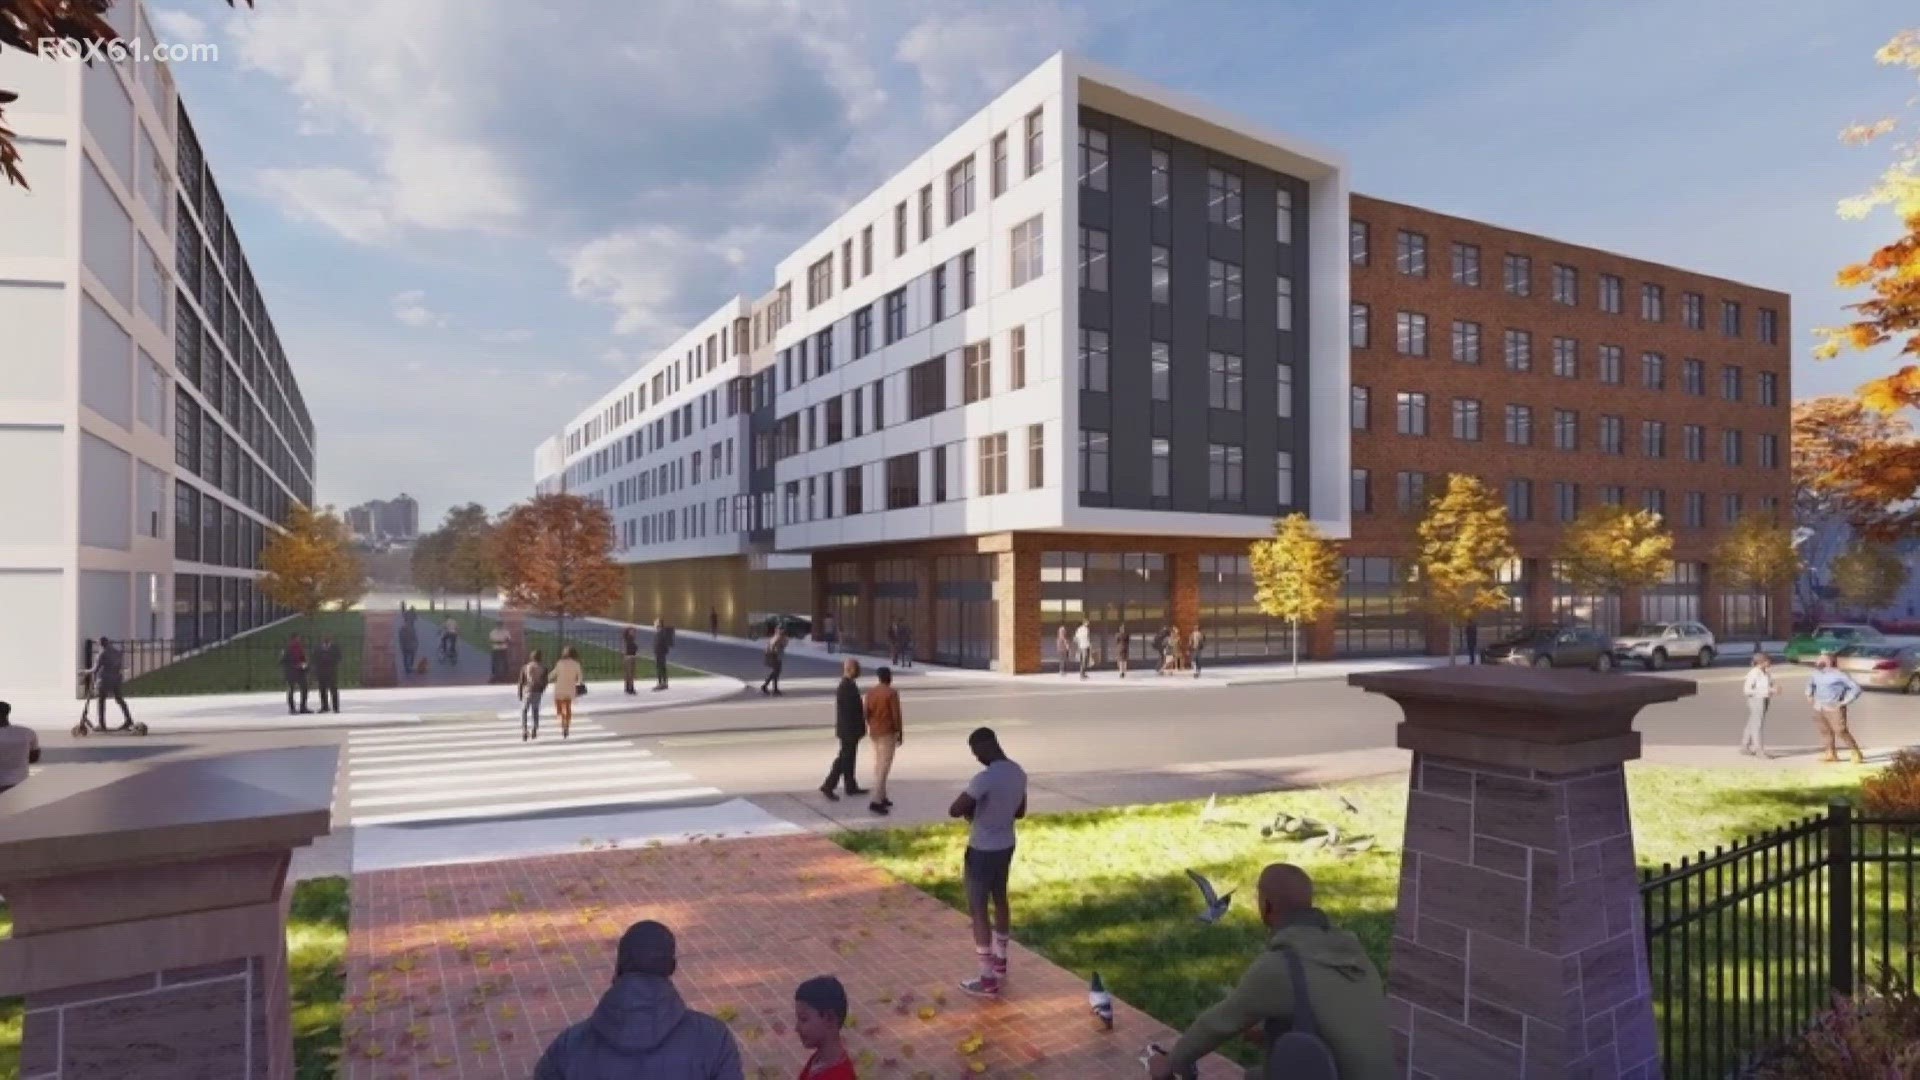 The new apartment complex will offer more affordable housing units than any other space in New Haven.